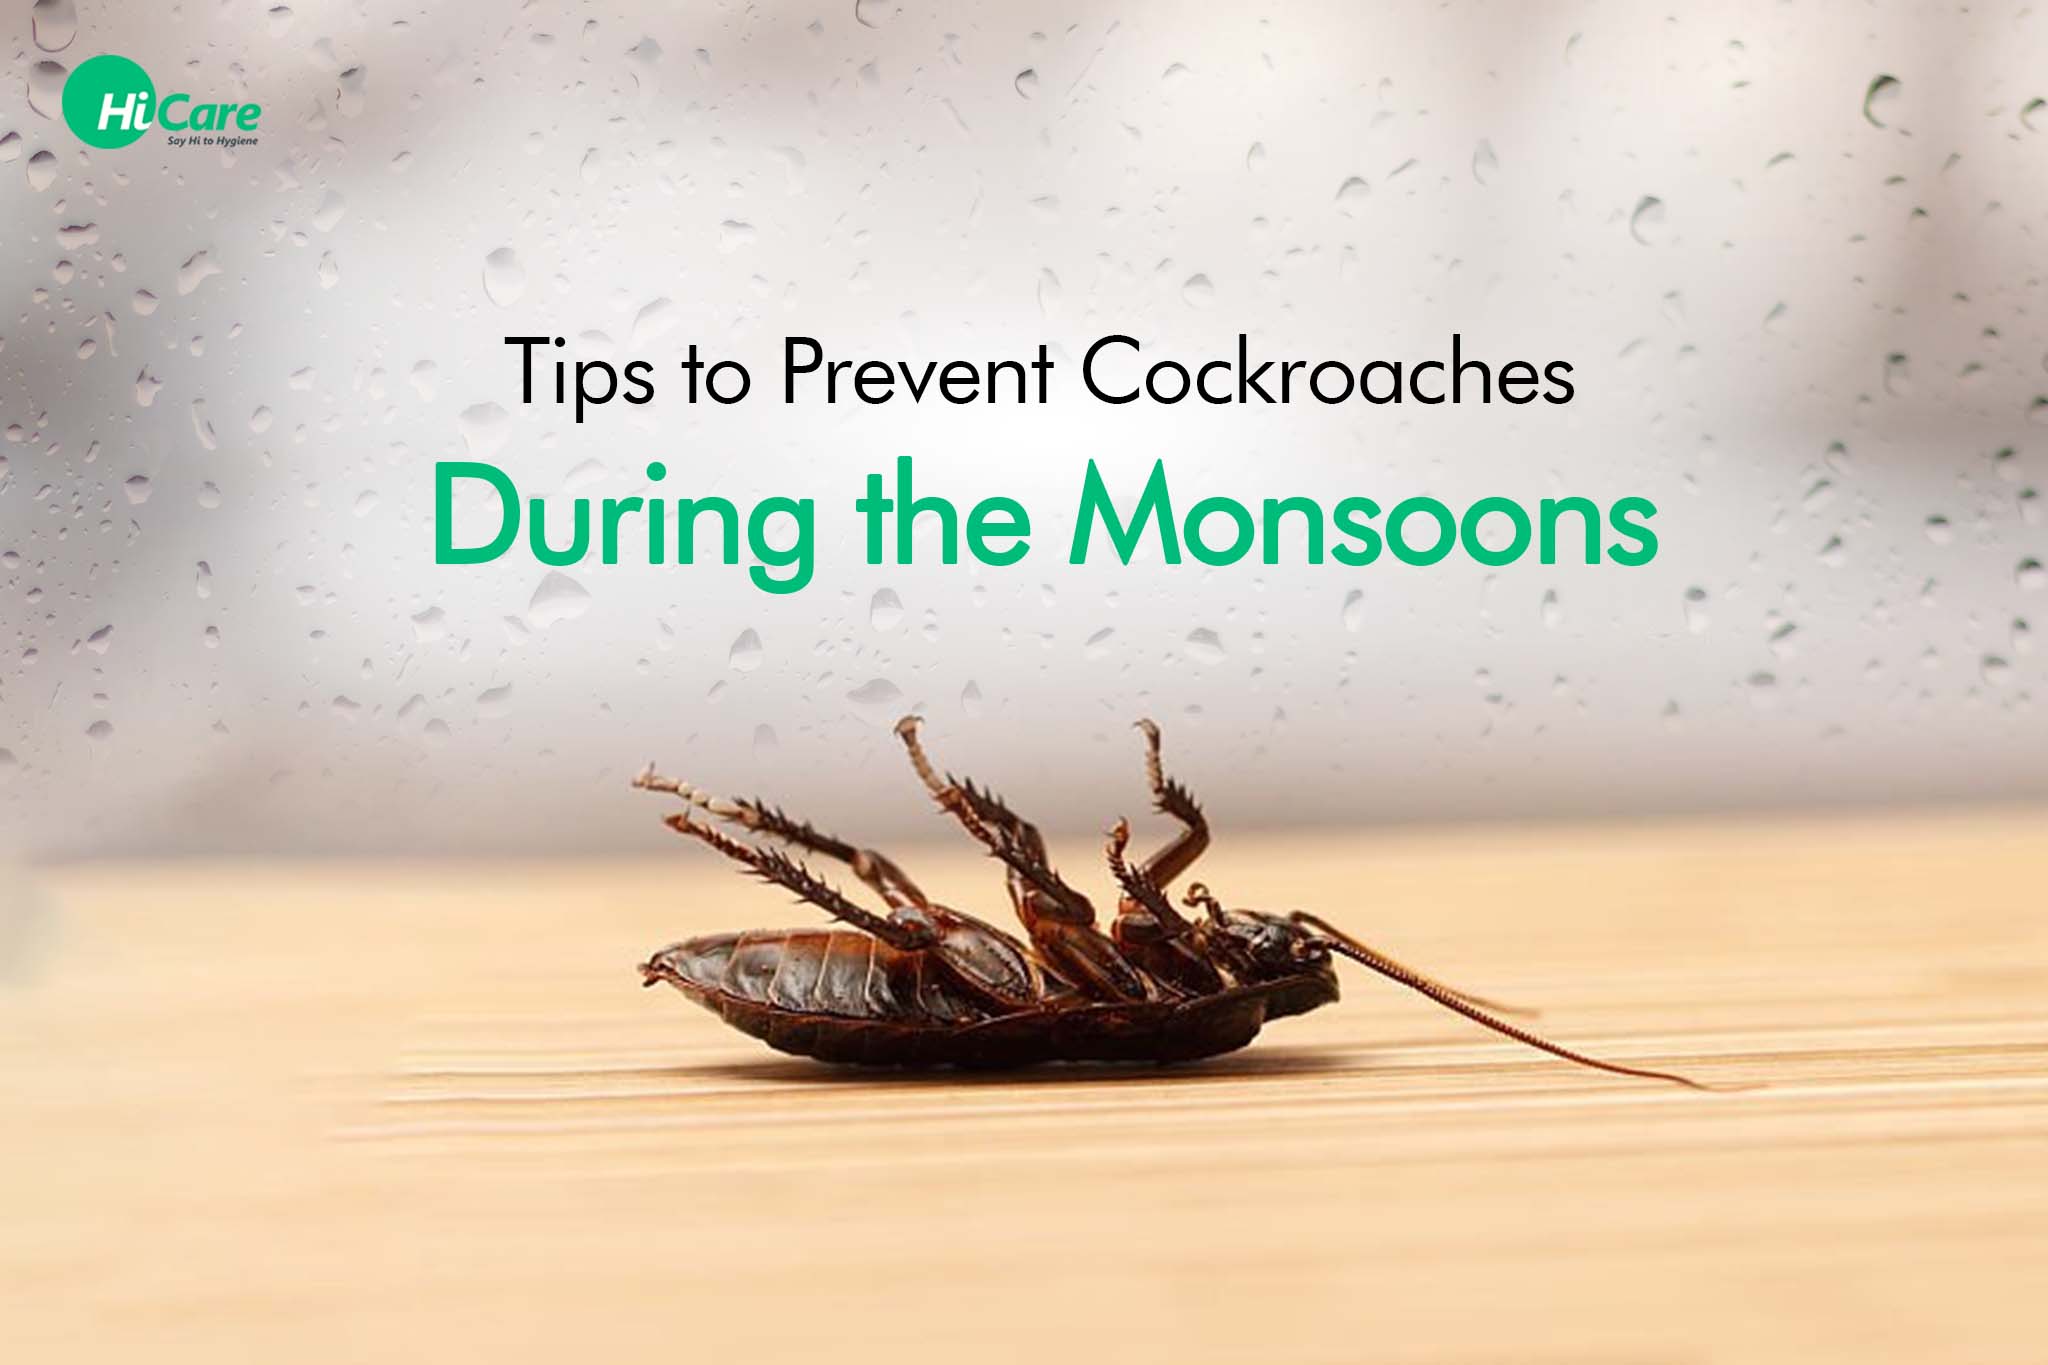 10 Tips to Prevent Cockroaches During the Monsoons